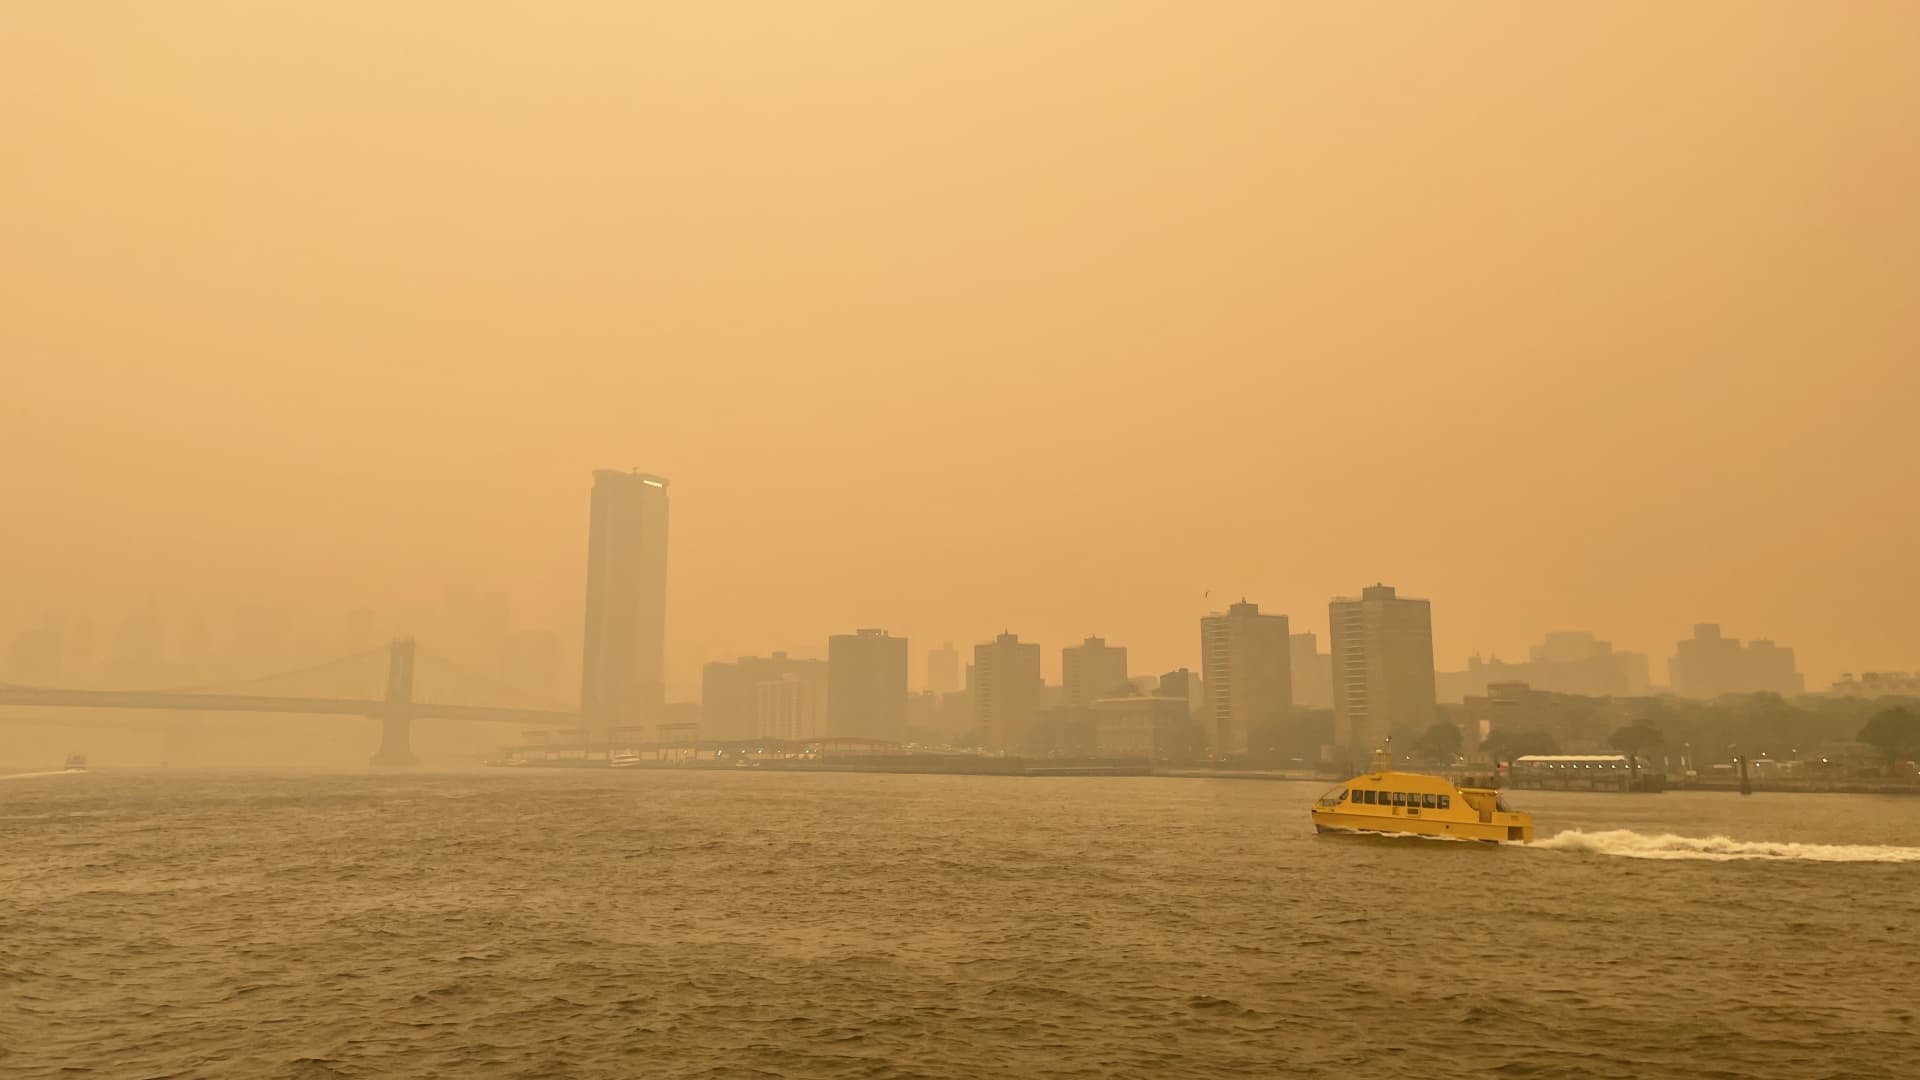 A whole bunch of northeast flights delayed as Canada wildfire smoke cuts visibility